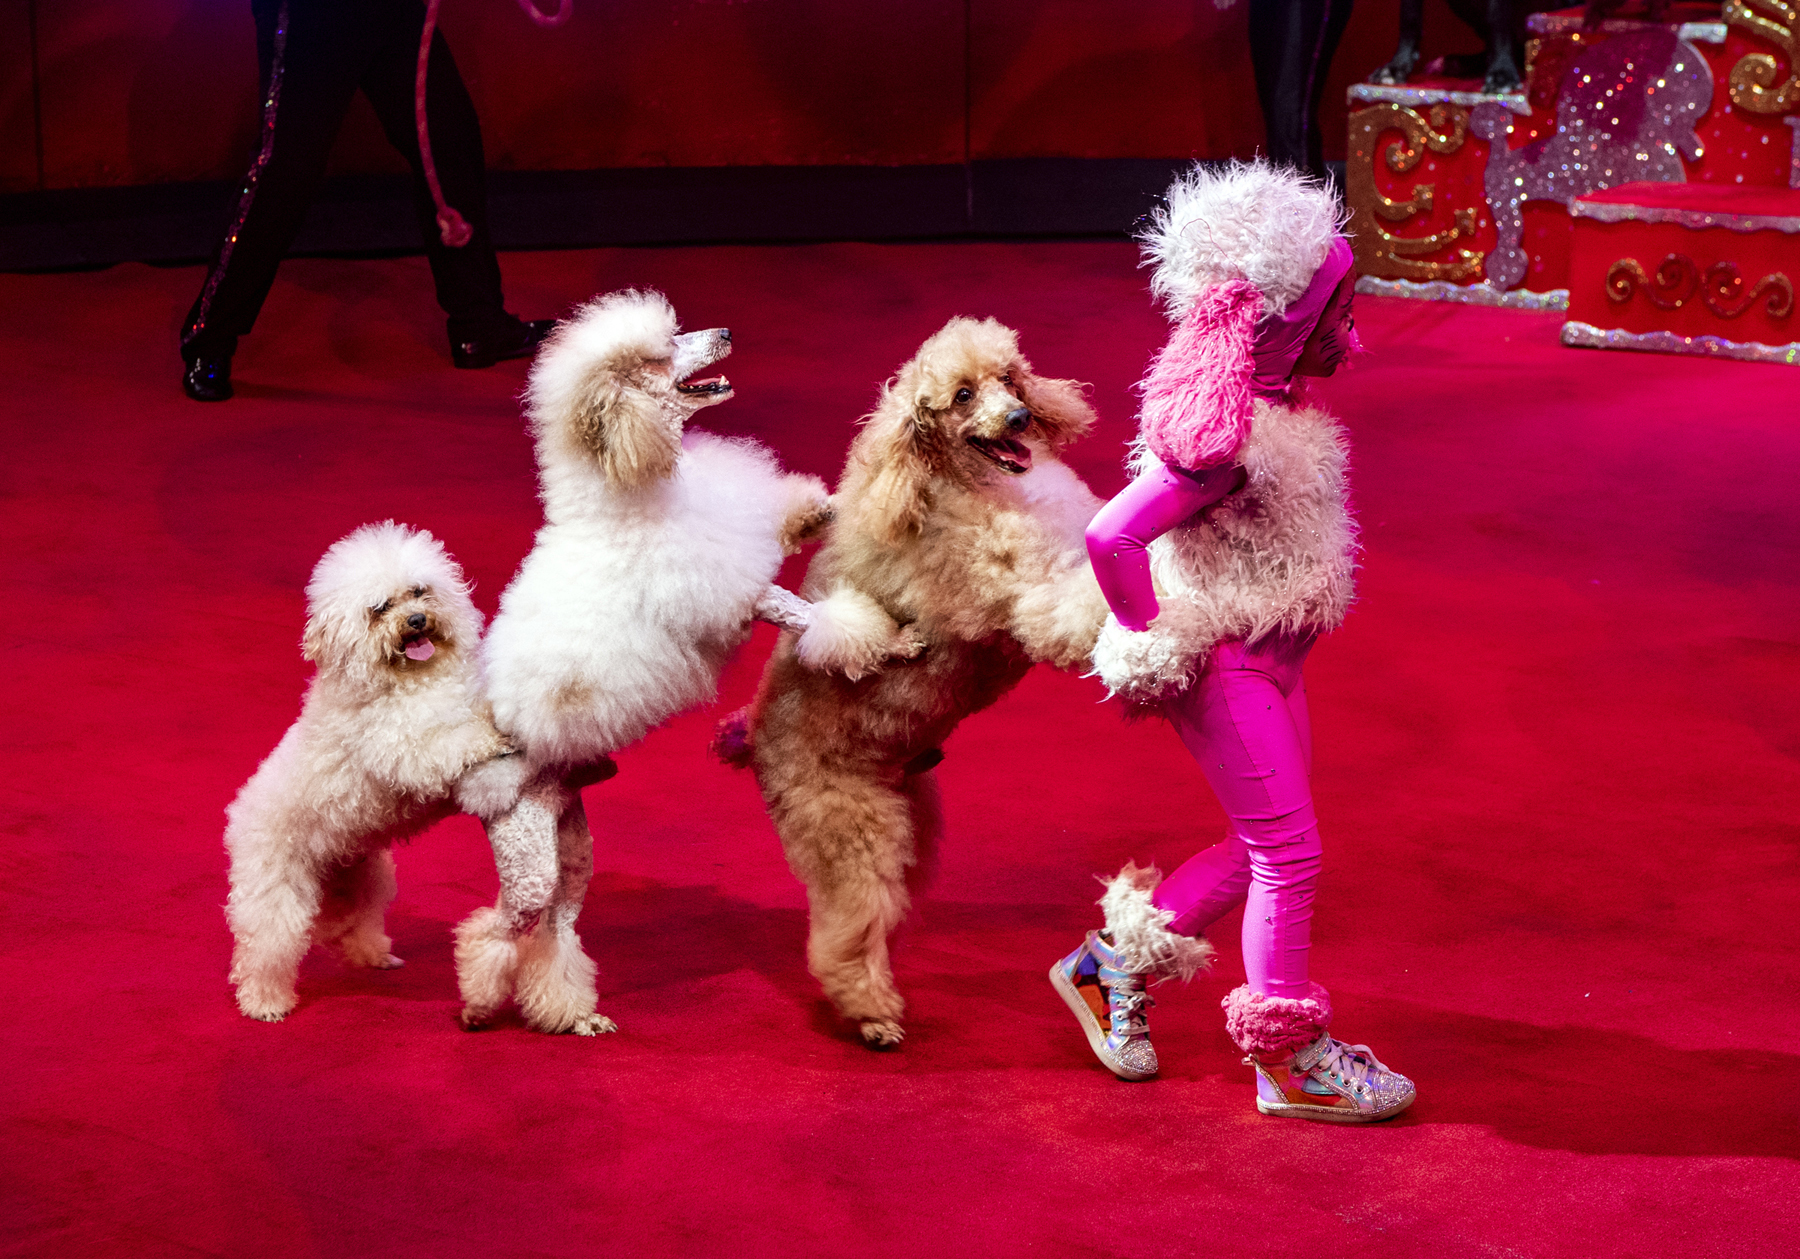 Everyone wants to be in showbiz. An infiltrator looks to have joined the Dominguez Poodles.